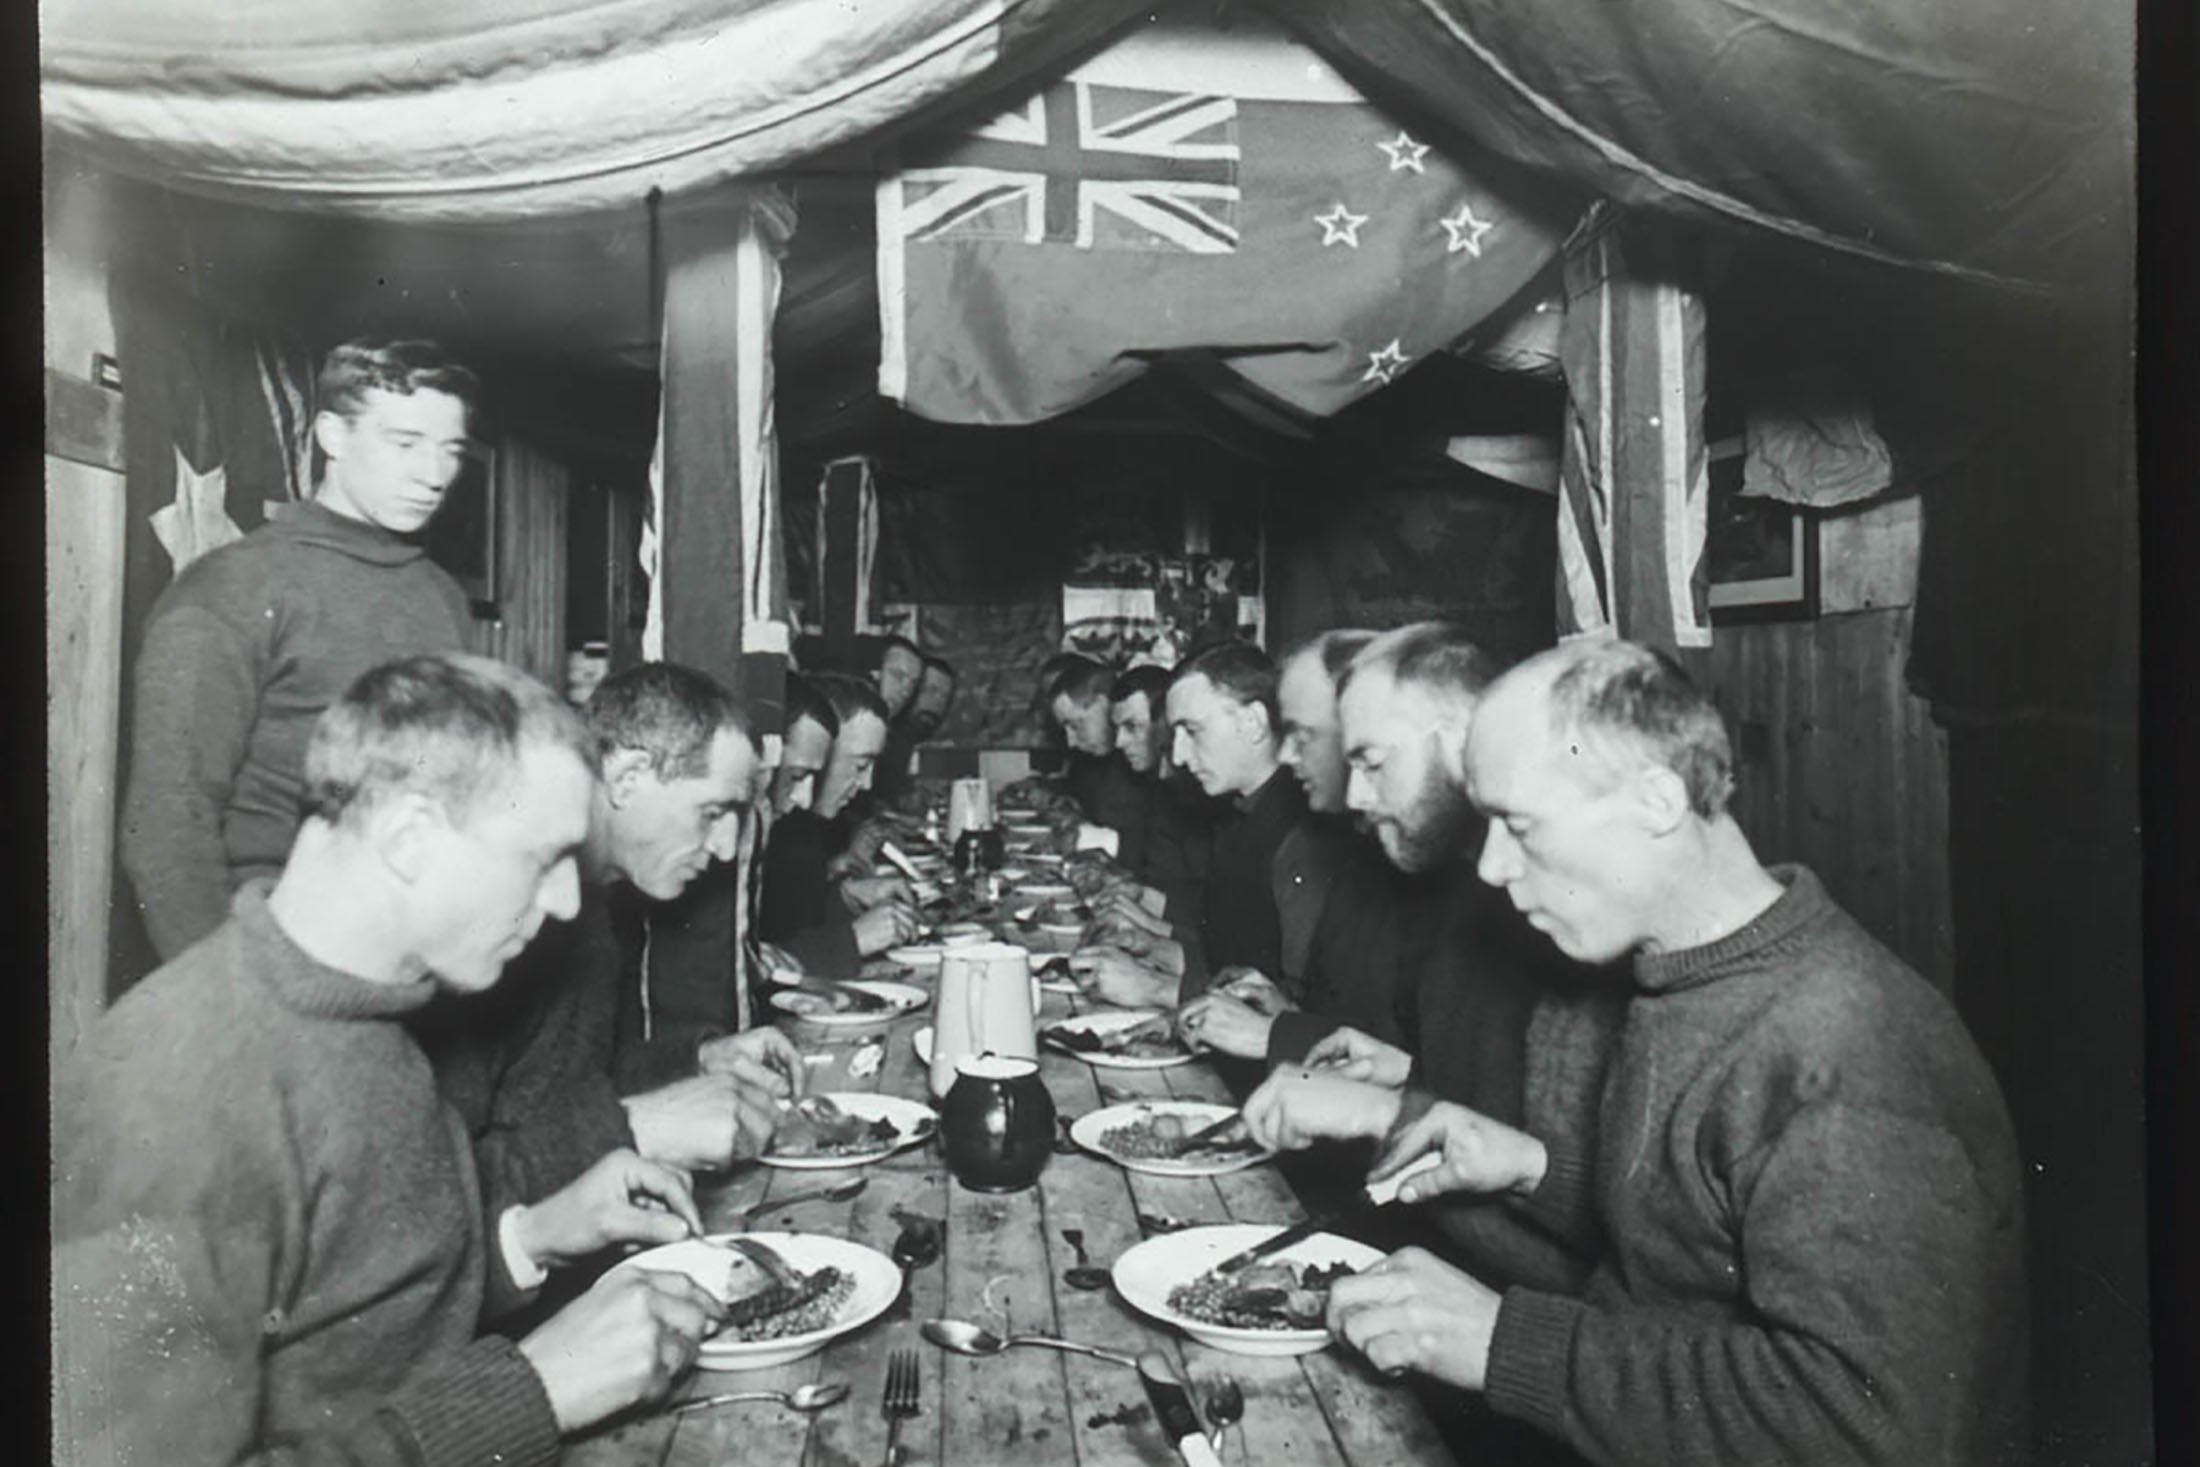 Sir Ernest Shackleton's party at dinner. (Photo courtesy of New South Wales State Library)